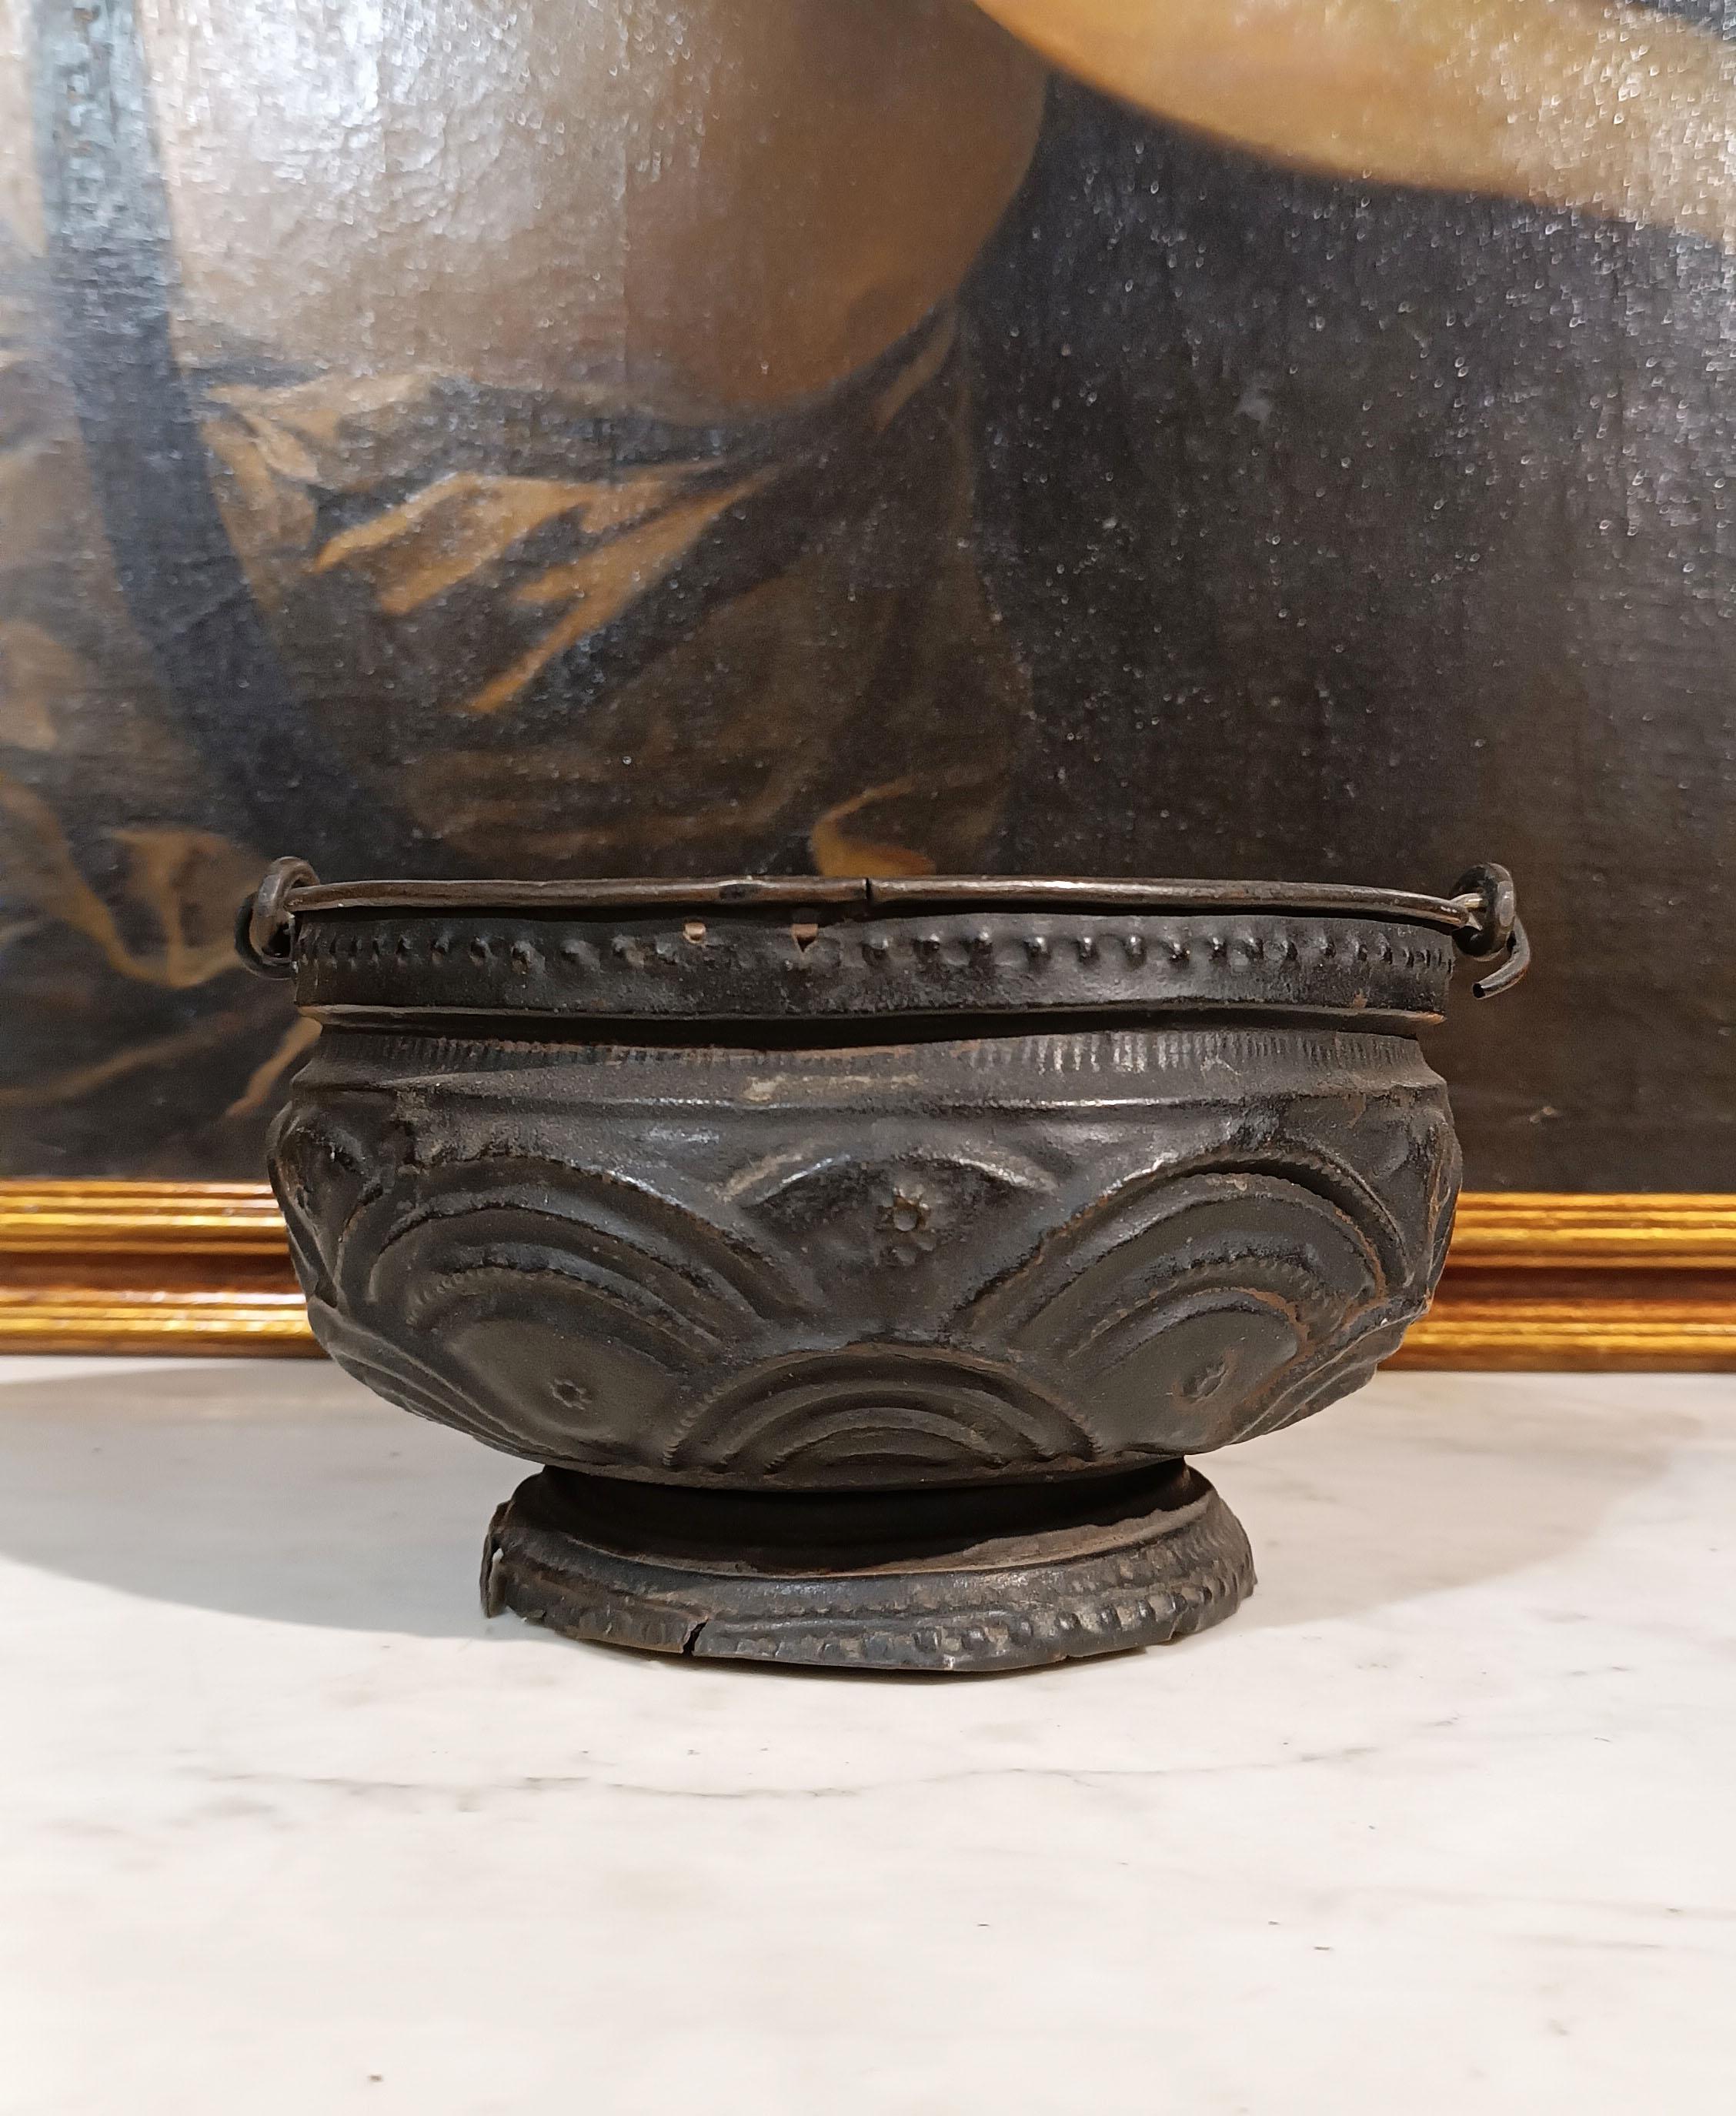 This small hand-warming brazier from the Renaissance era in wrought iron is a handcrafted object of great value, handmade with care and precision. The origin of this object is attributed to the Tuscan-Umbrian manufacture of the end of the 15th